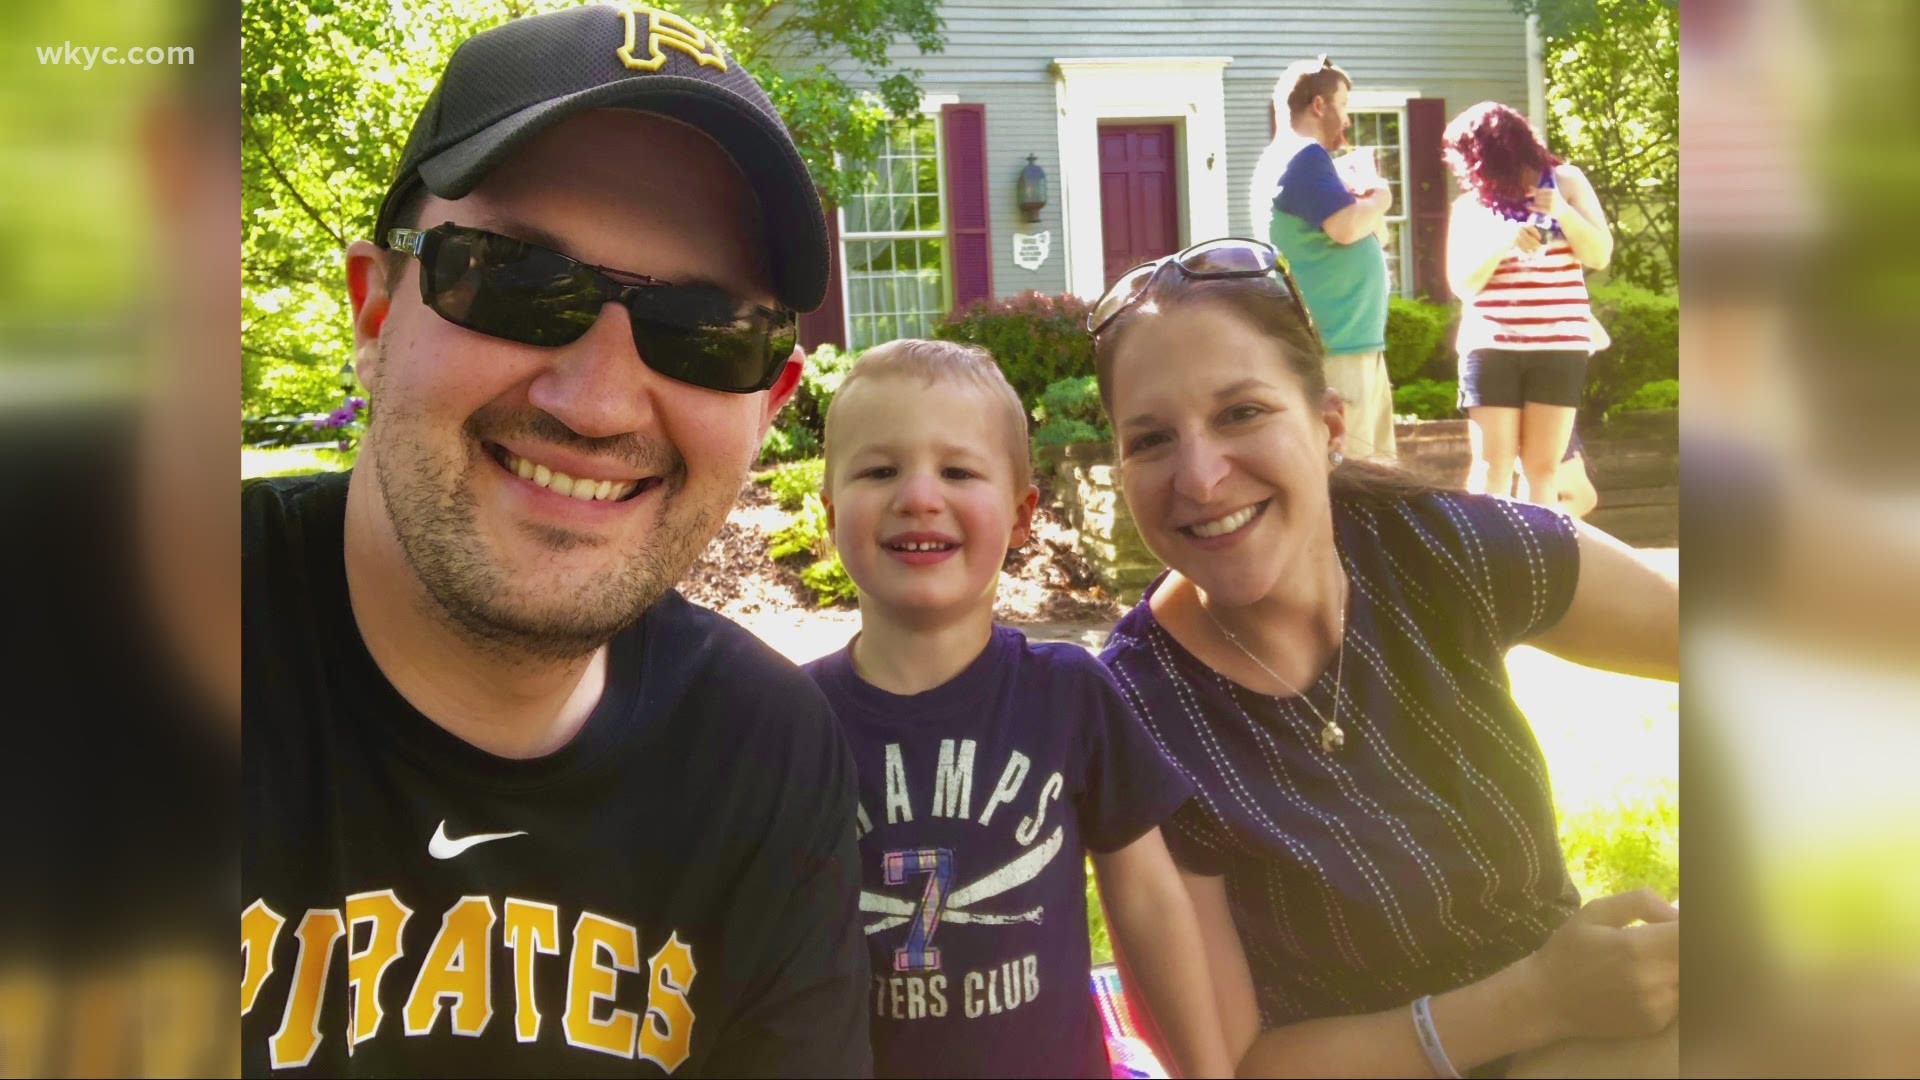 A local dad running a full marathon around the hospital where his son is staying for cancer treatment. Lindsay Buckingham has the amazing story.